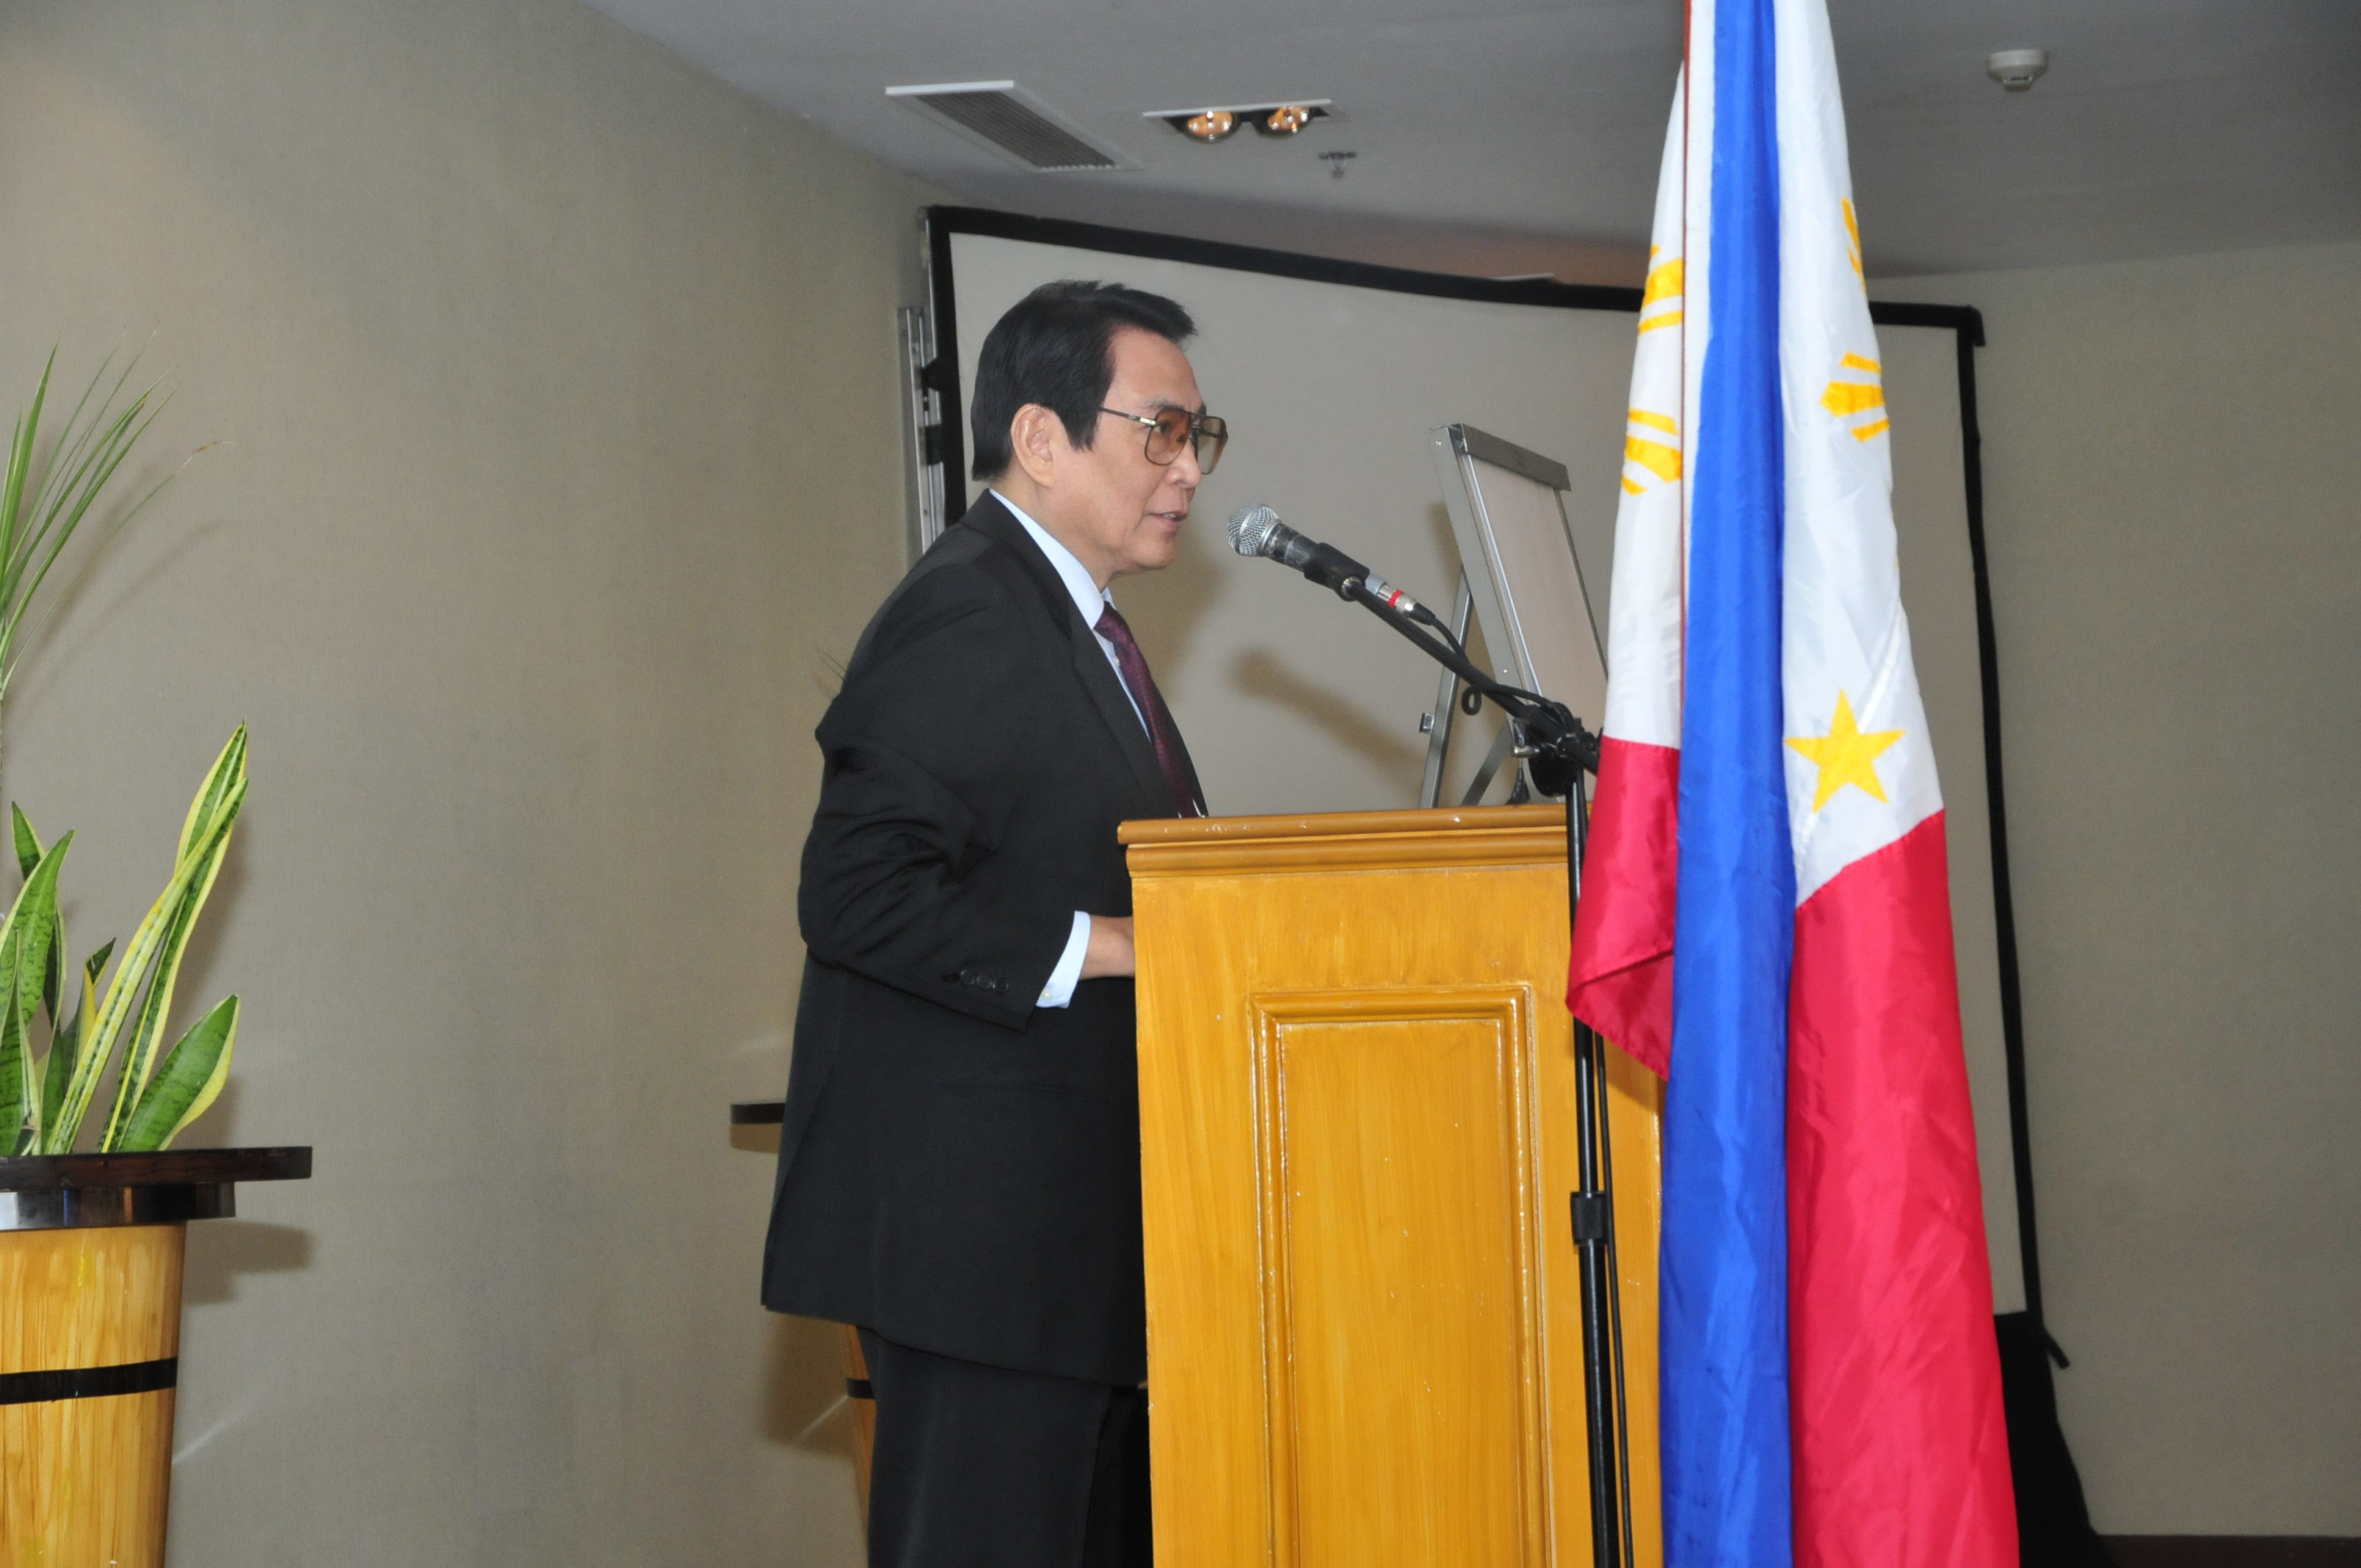 2011</br>Launch of The Rizal Academy </br>for Innovation and Leadership</br>January 24, 2011